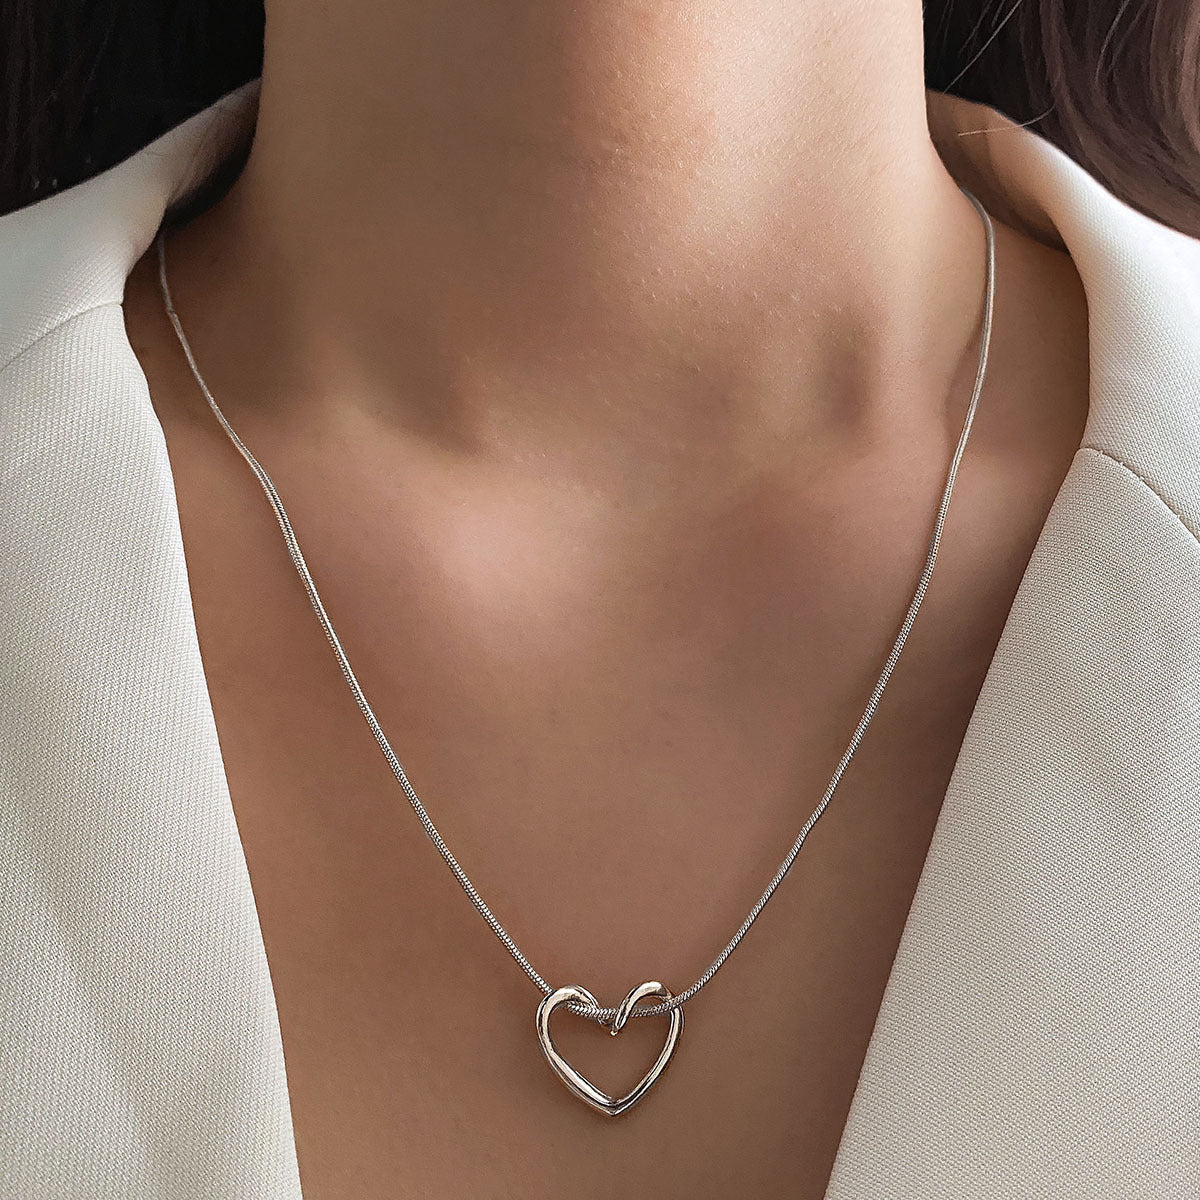  Hollow Heart Necklace for Women